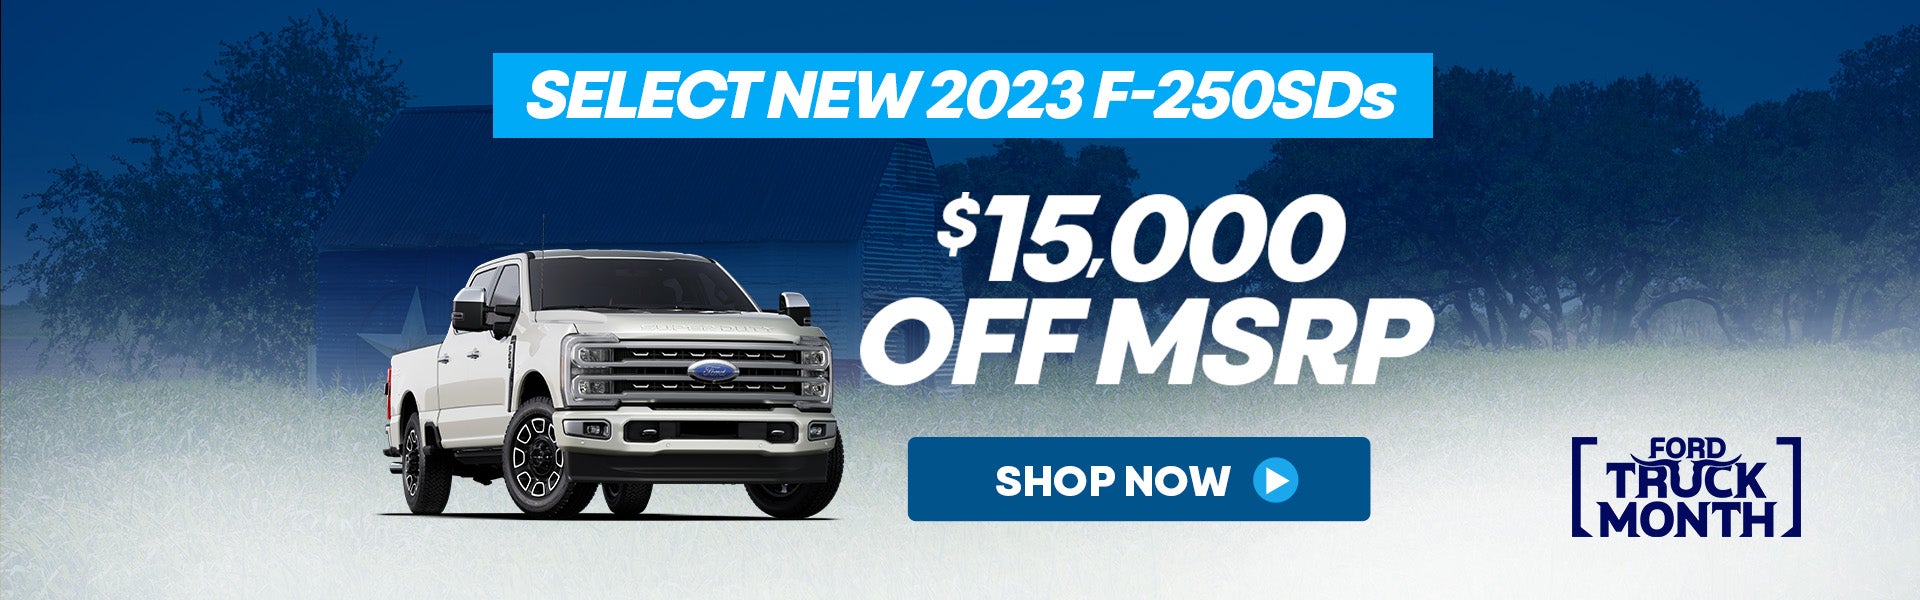 New Ford F-250 Specials Near Me in Rosenberg, TX